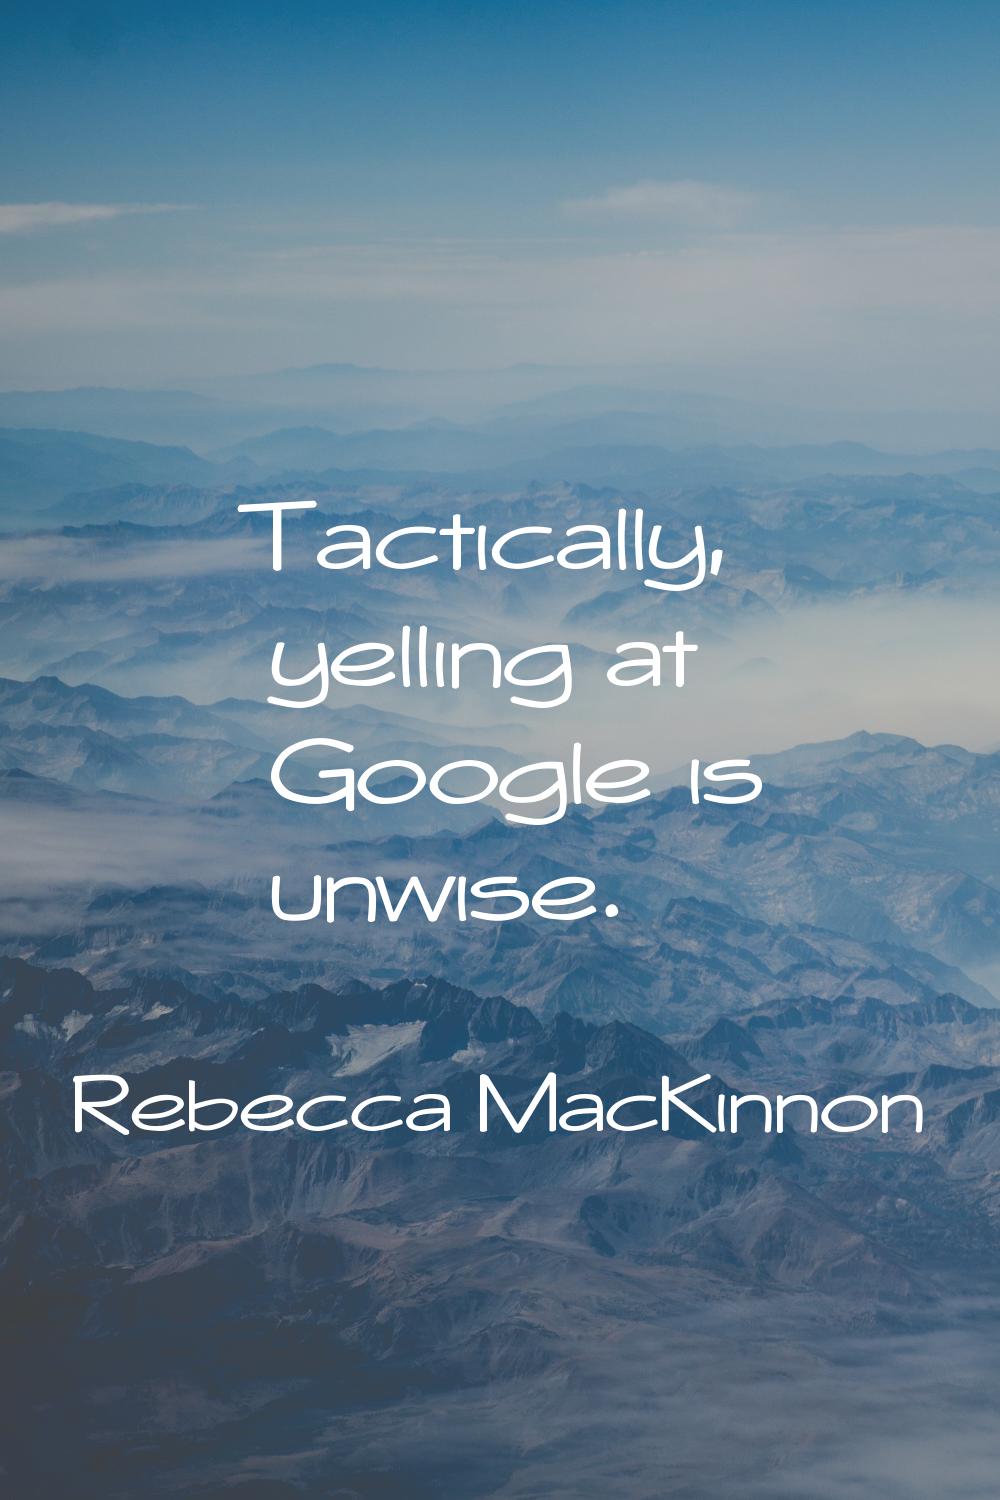 Tactically, yelling at Google is unwise.